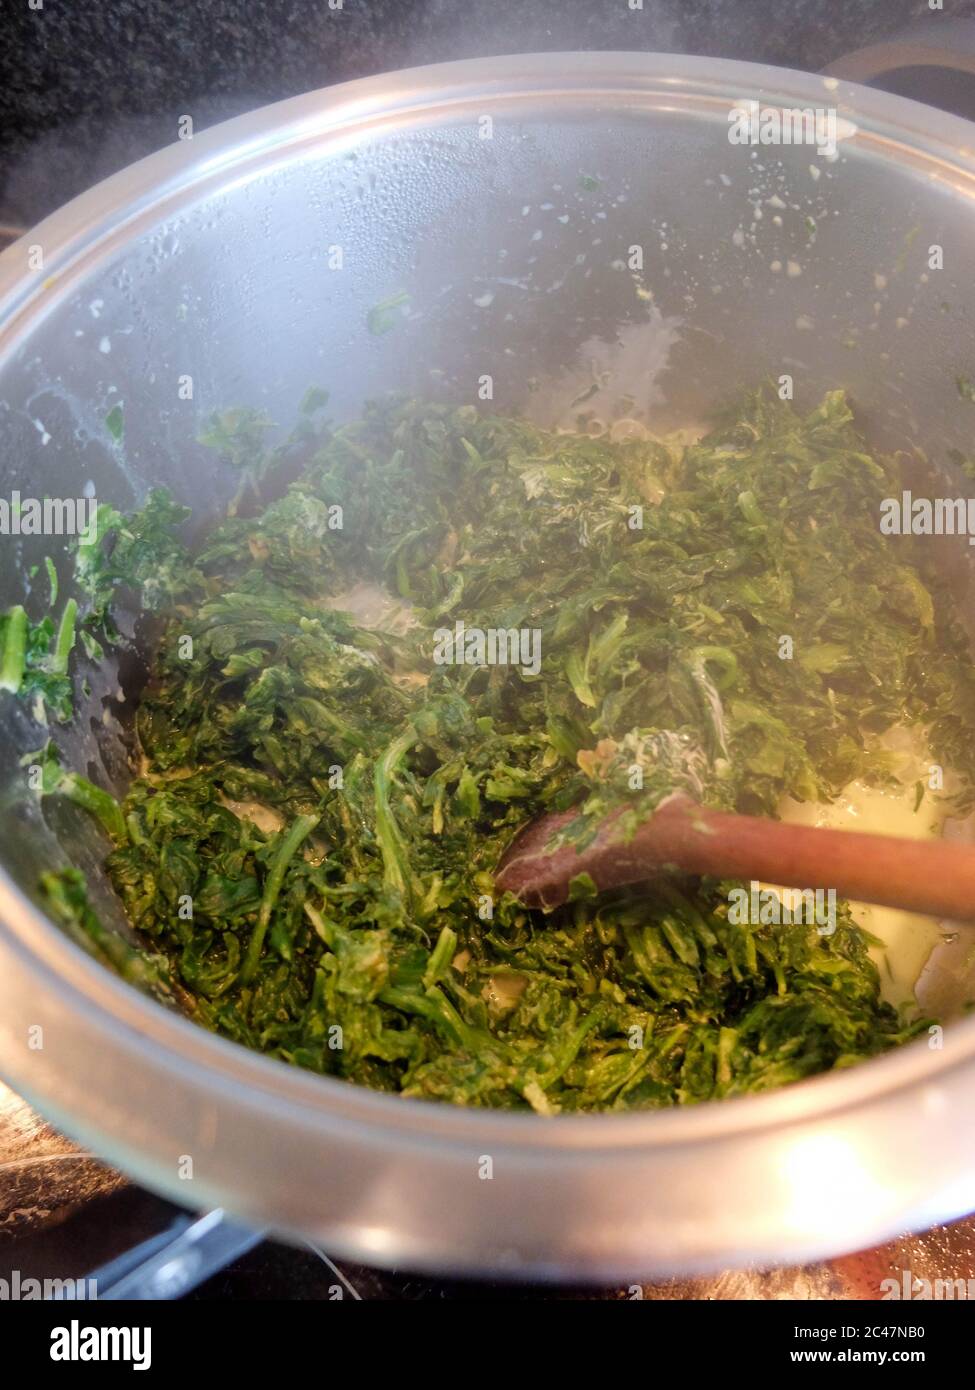 Spinach cooked in a span Stock Photo